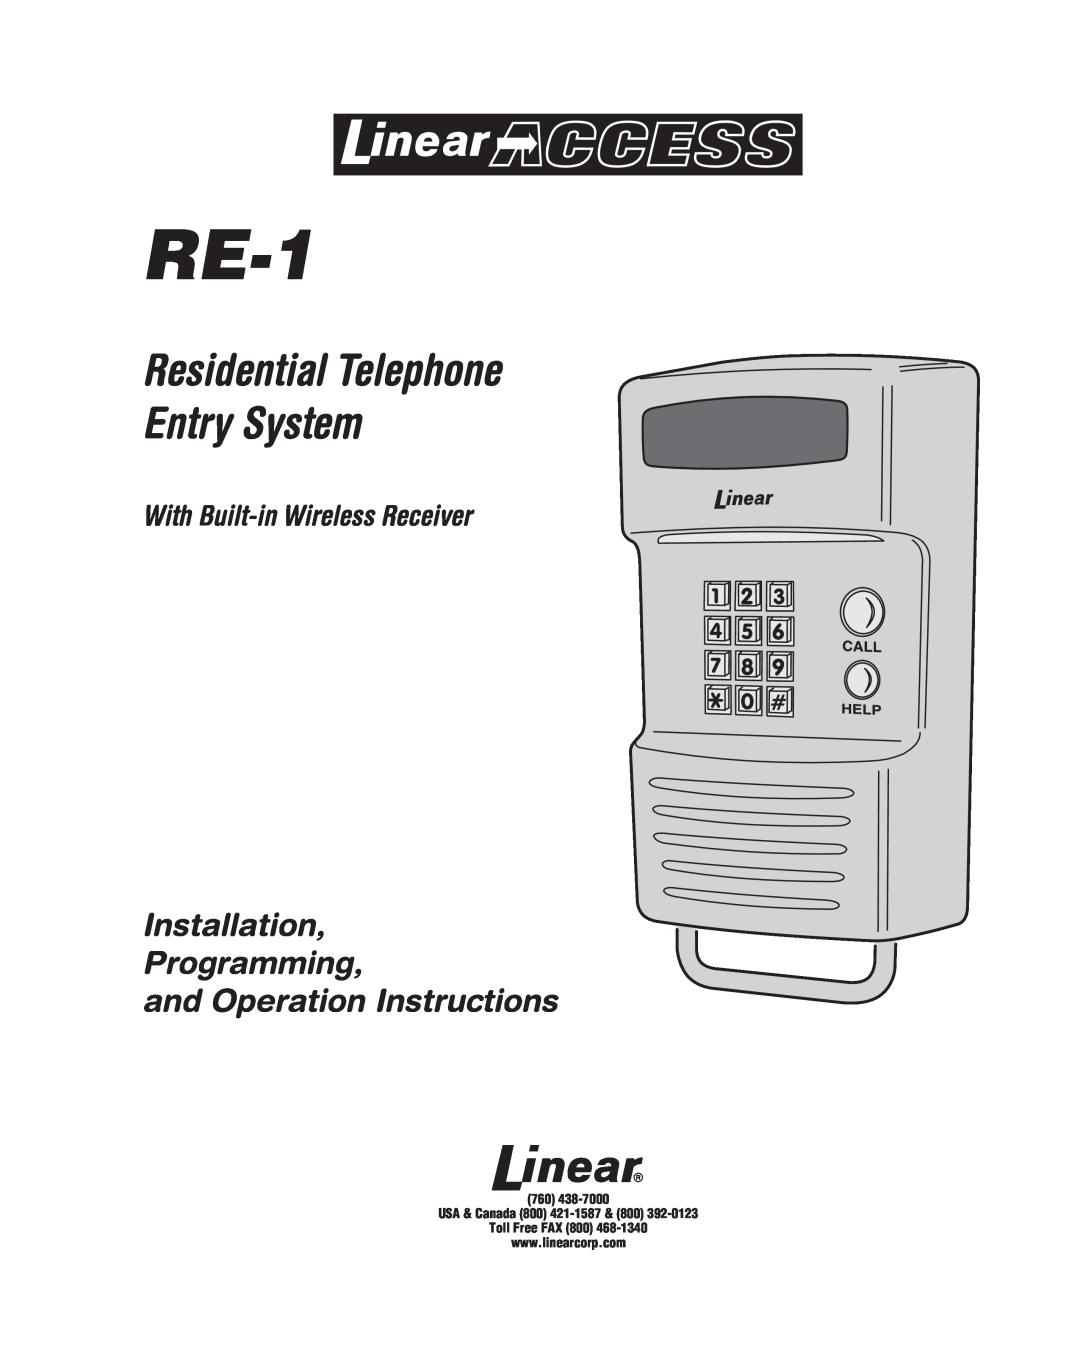 Linear RE-1 manual Residential Telephone Entry System, Installation Programming and Operation Instructions 